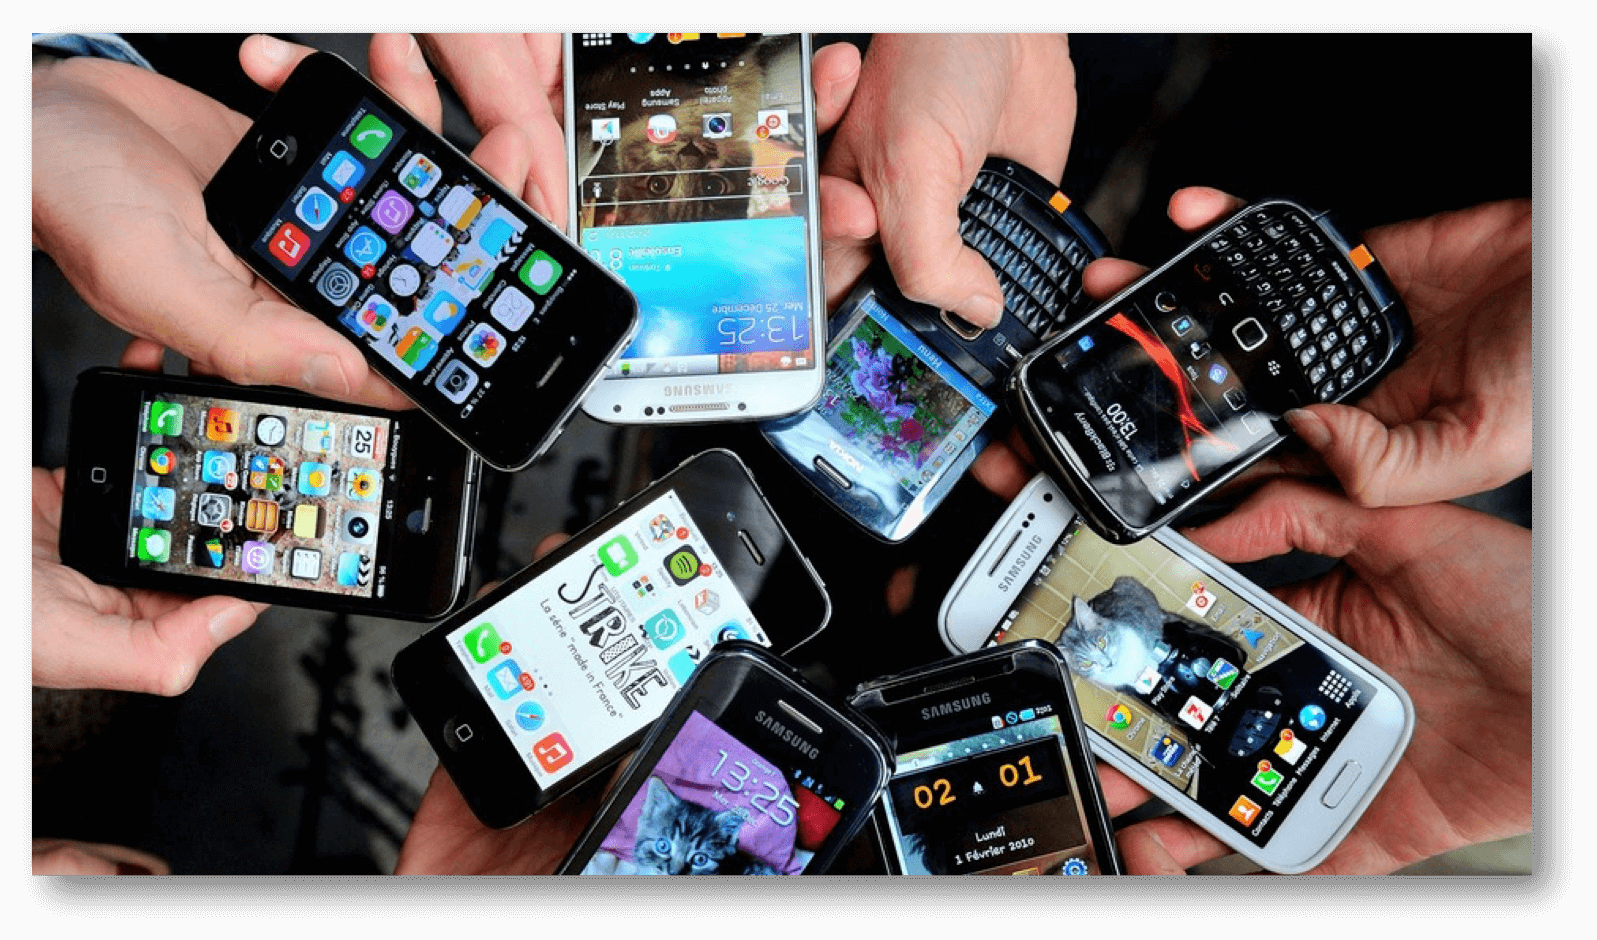 The Smartphone More than a Phone